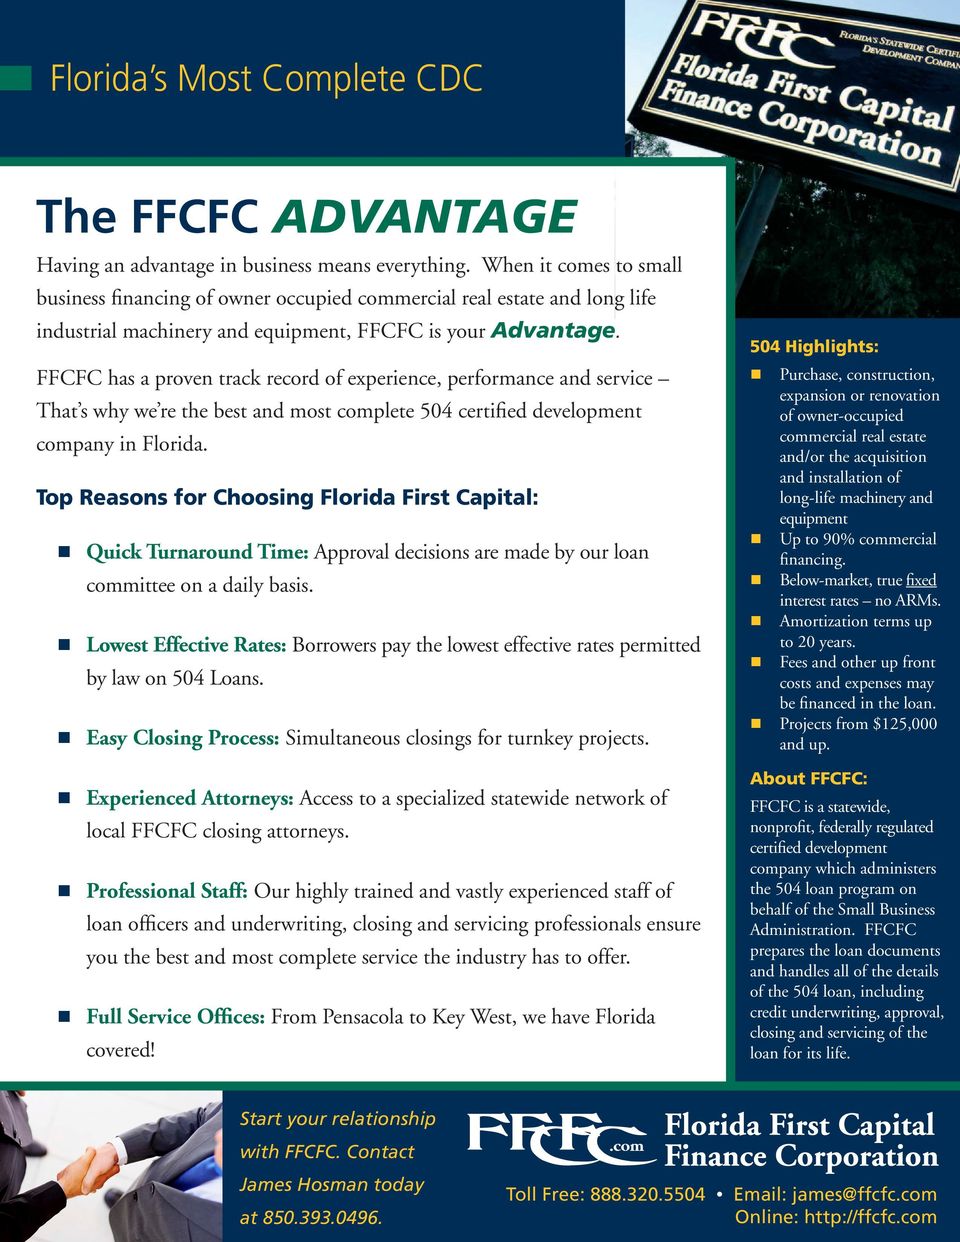 FFCFC has a proven track record of experience, performance and service That s why we re the best and most complete 504 certified development company in Florida.